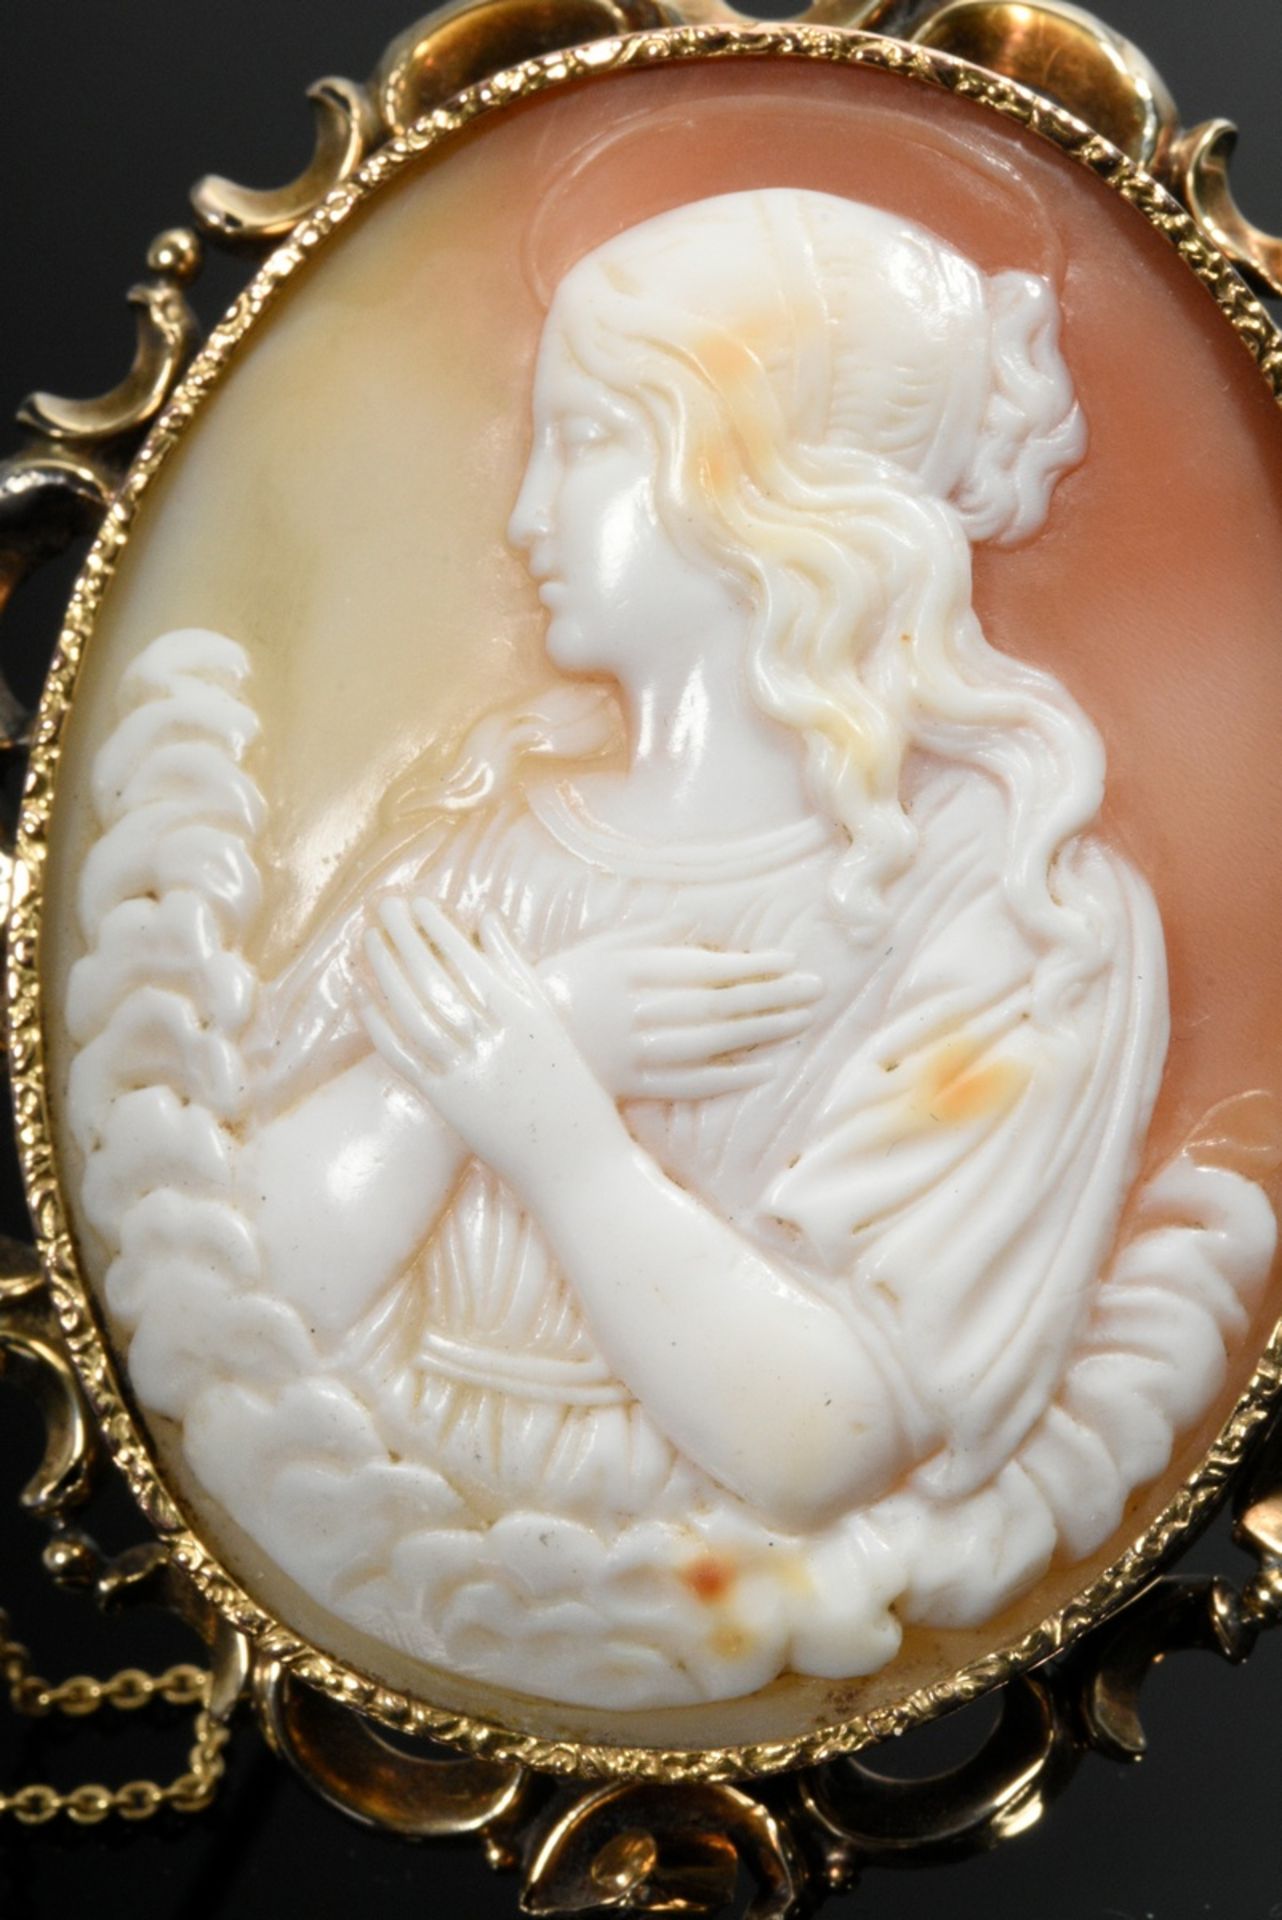 Antique shell cameo needle "Holy Virgin" in rose gold 585 setting, 16.5g, 5.7x4.6cm, verso monogram - Image 2 of 3